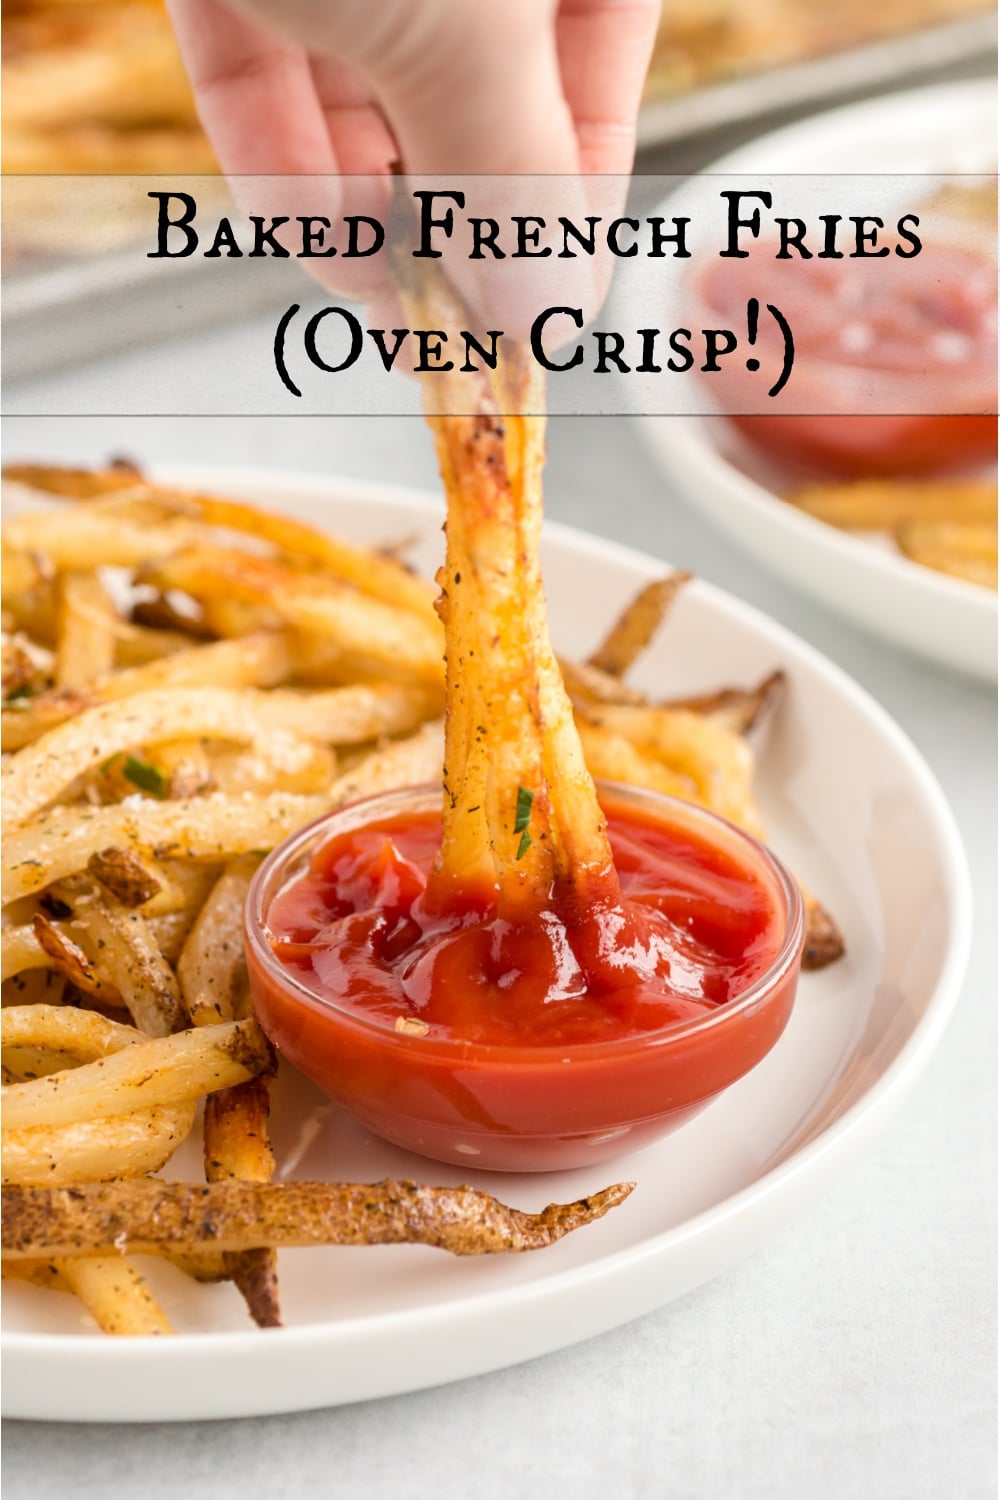 If crispy oven fries do not make their way into your life nearly enough, here's a delicious reminder to change that immediately. via @cmpollak1